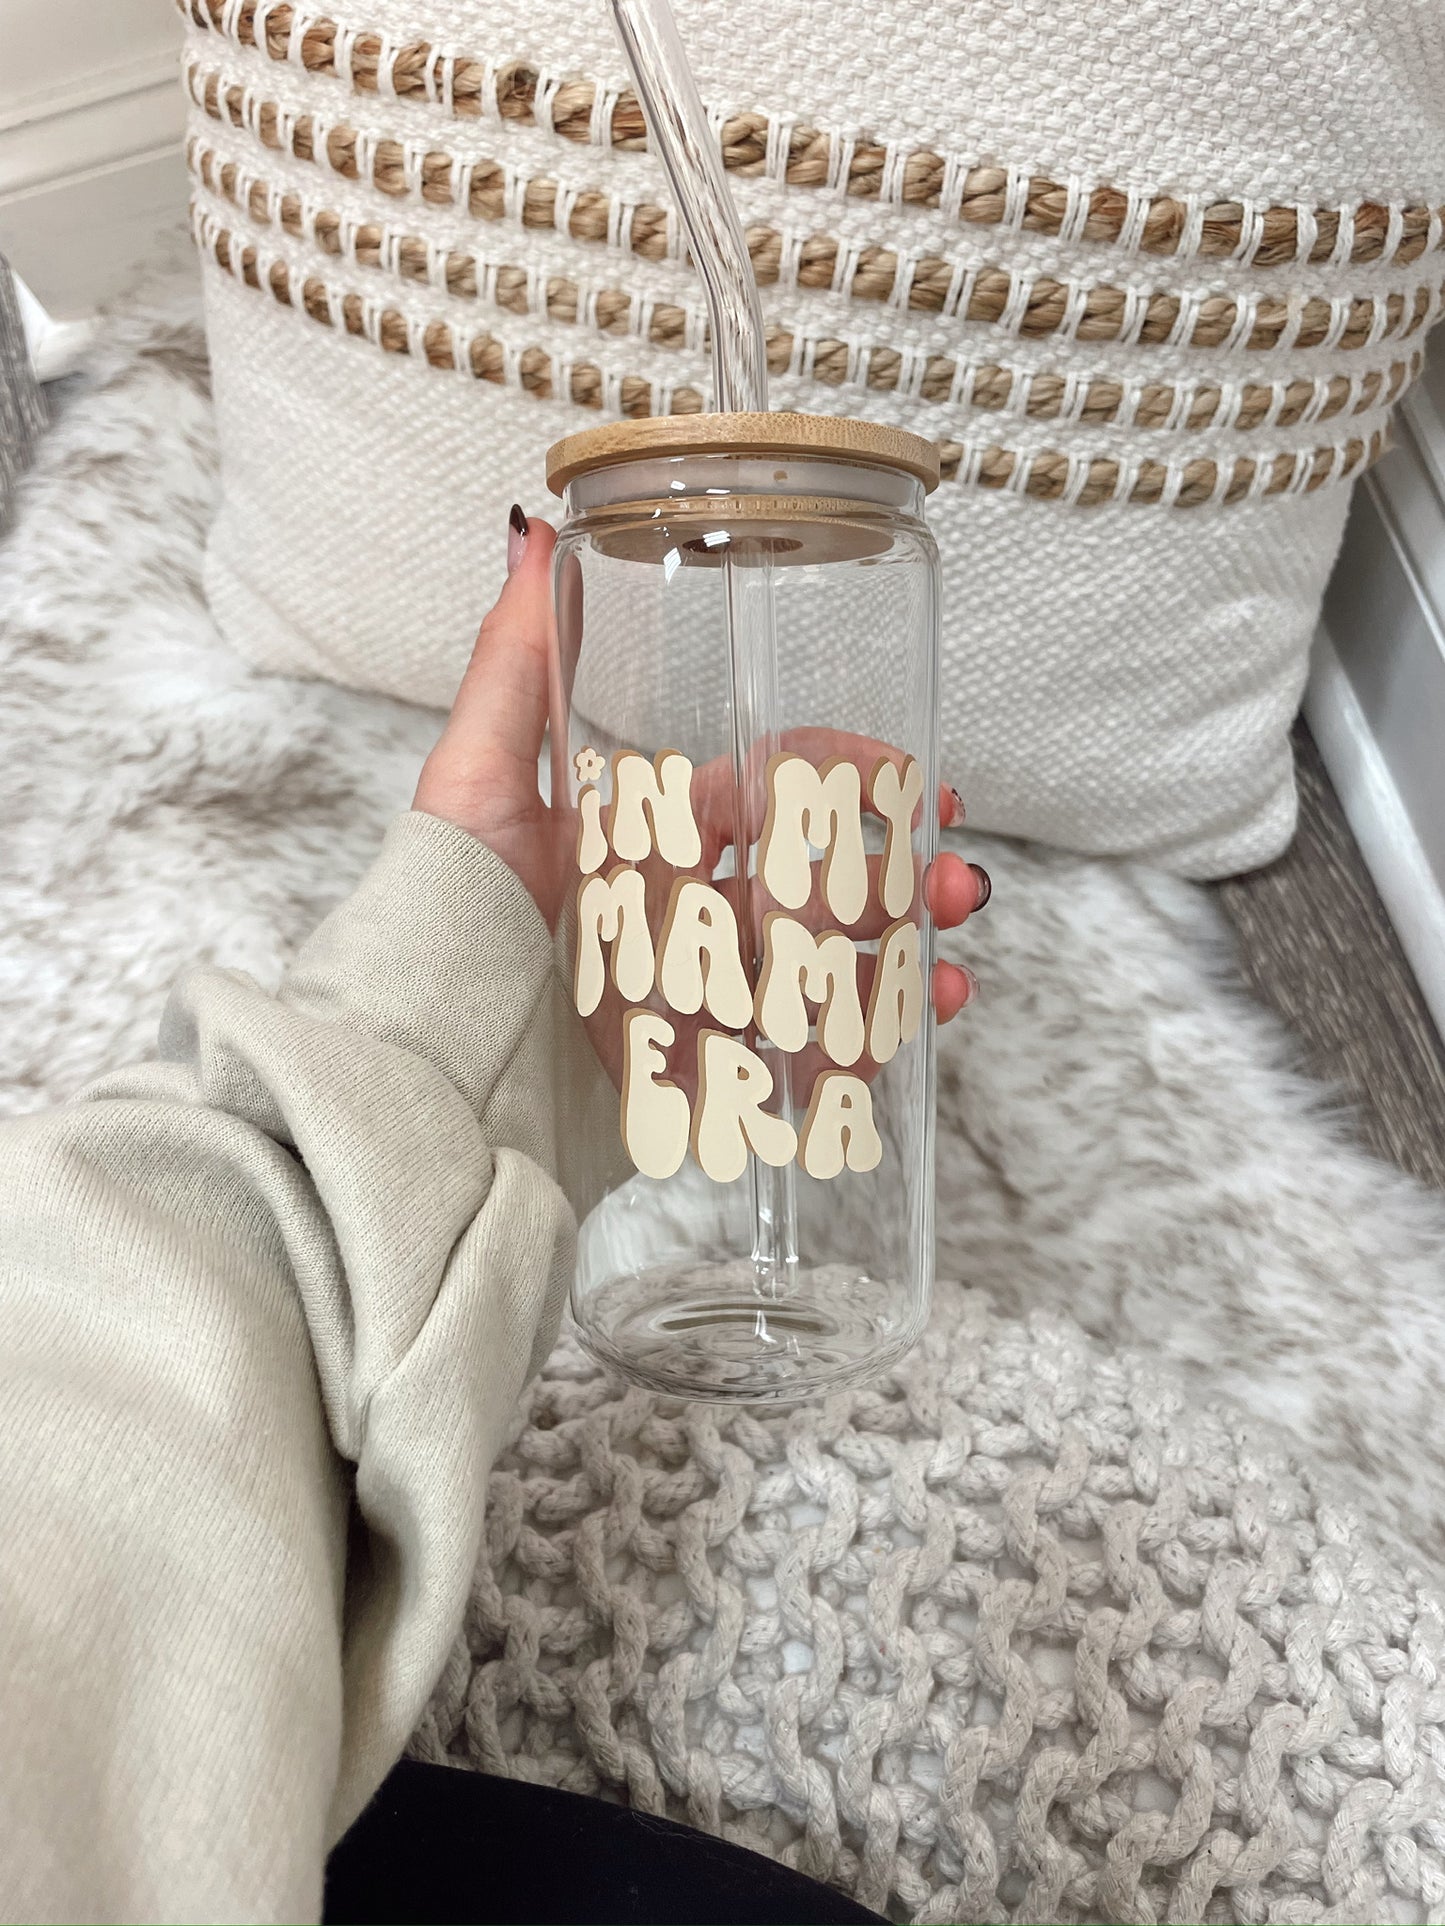 glass cup with straw that say "in my mama era" on it in beige